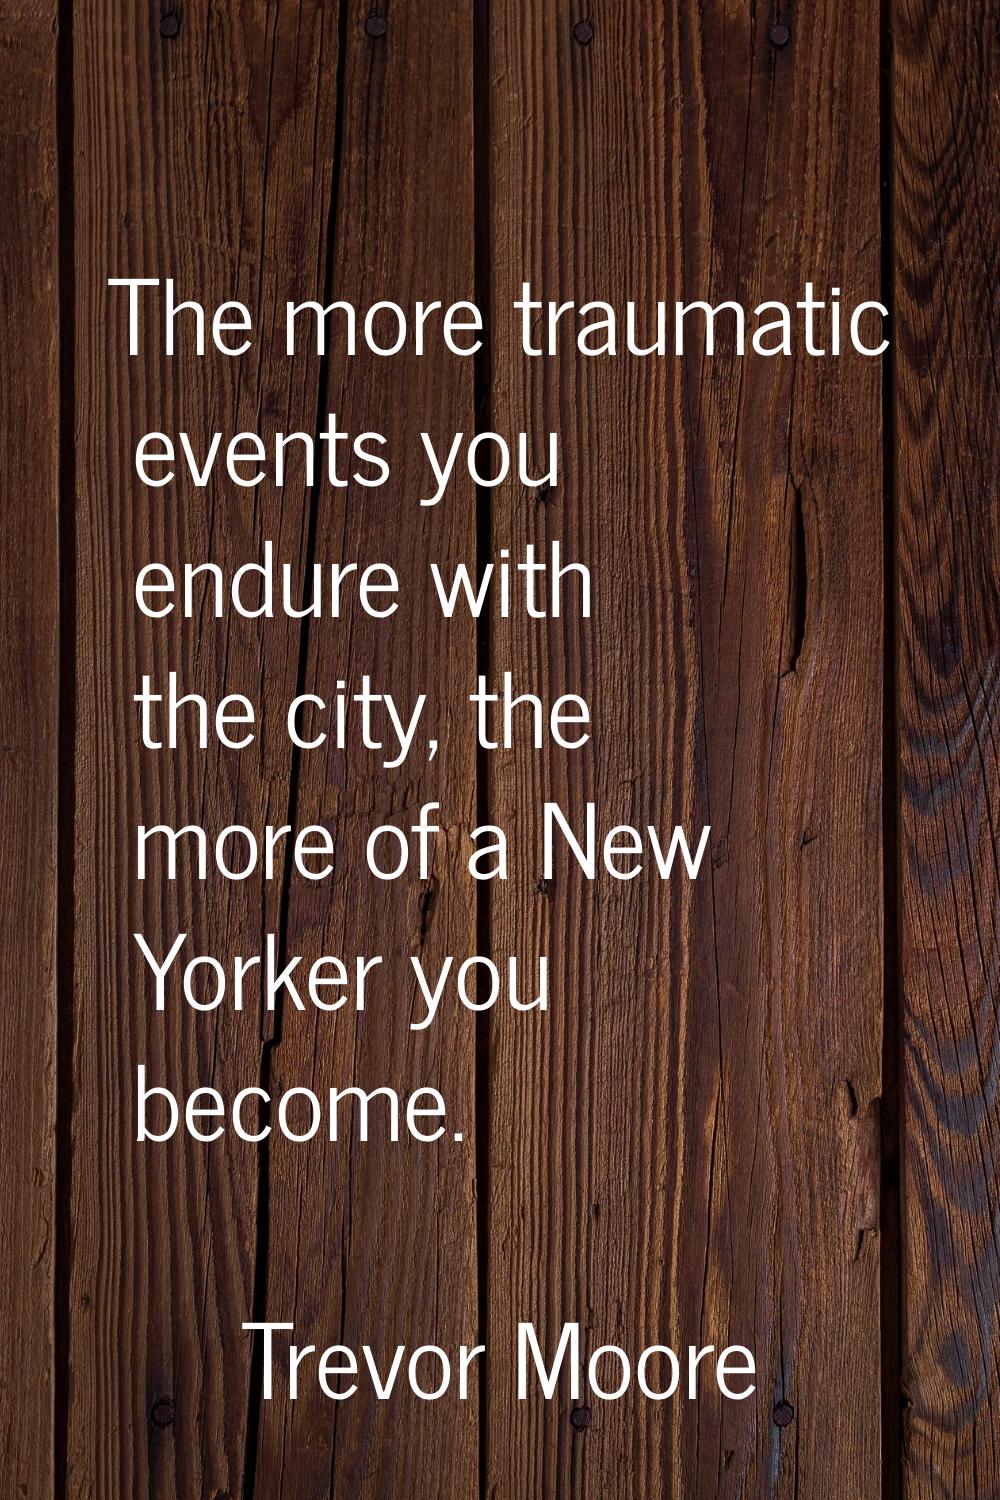 The more traumatic events you endure with the city, the more of a New Yorker you become.